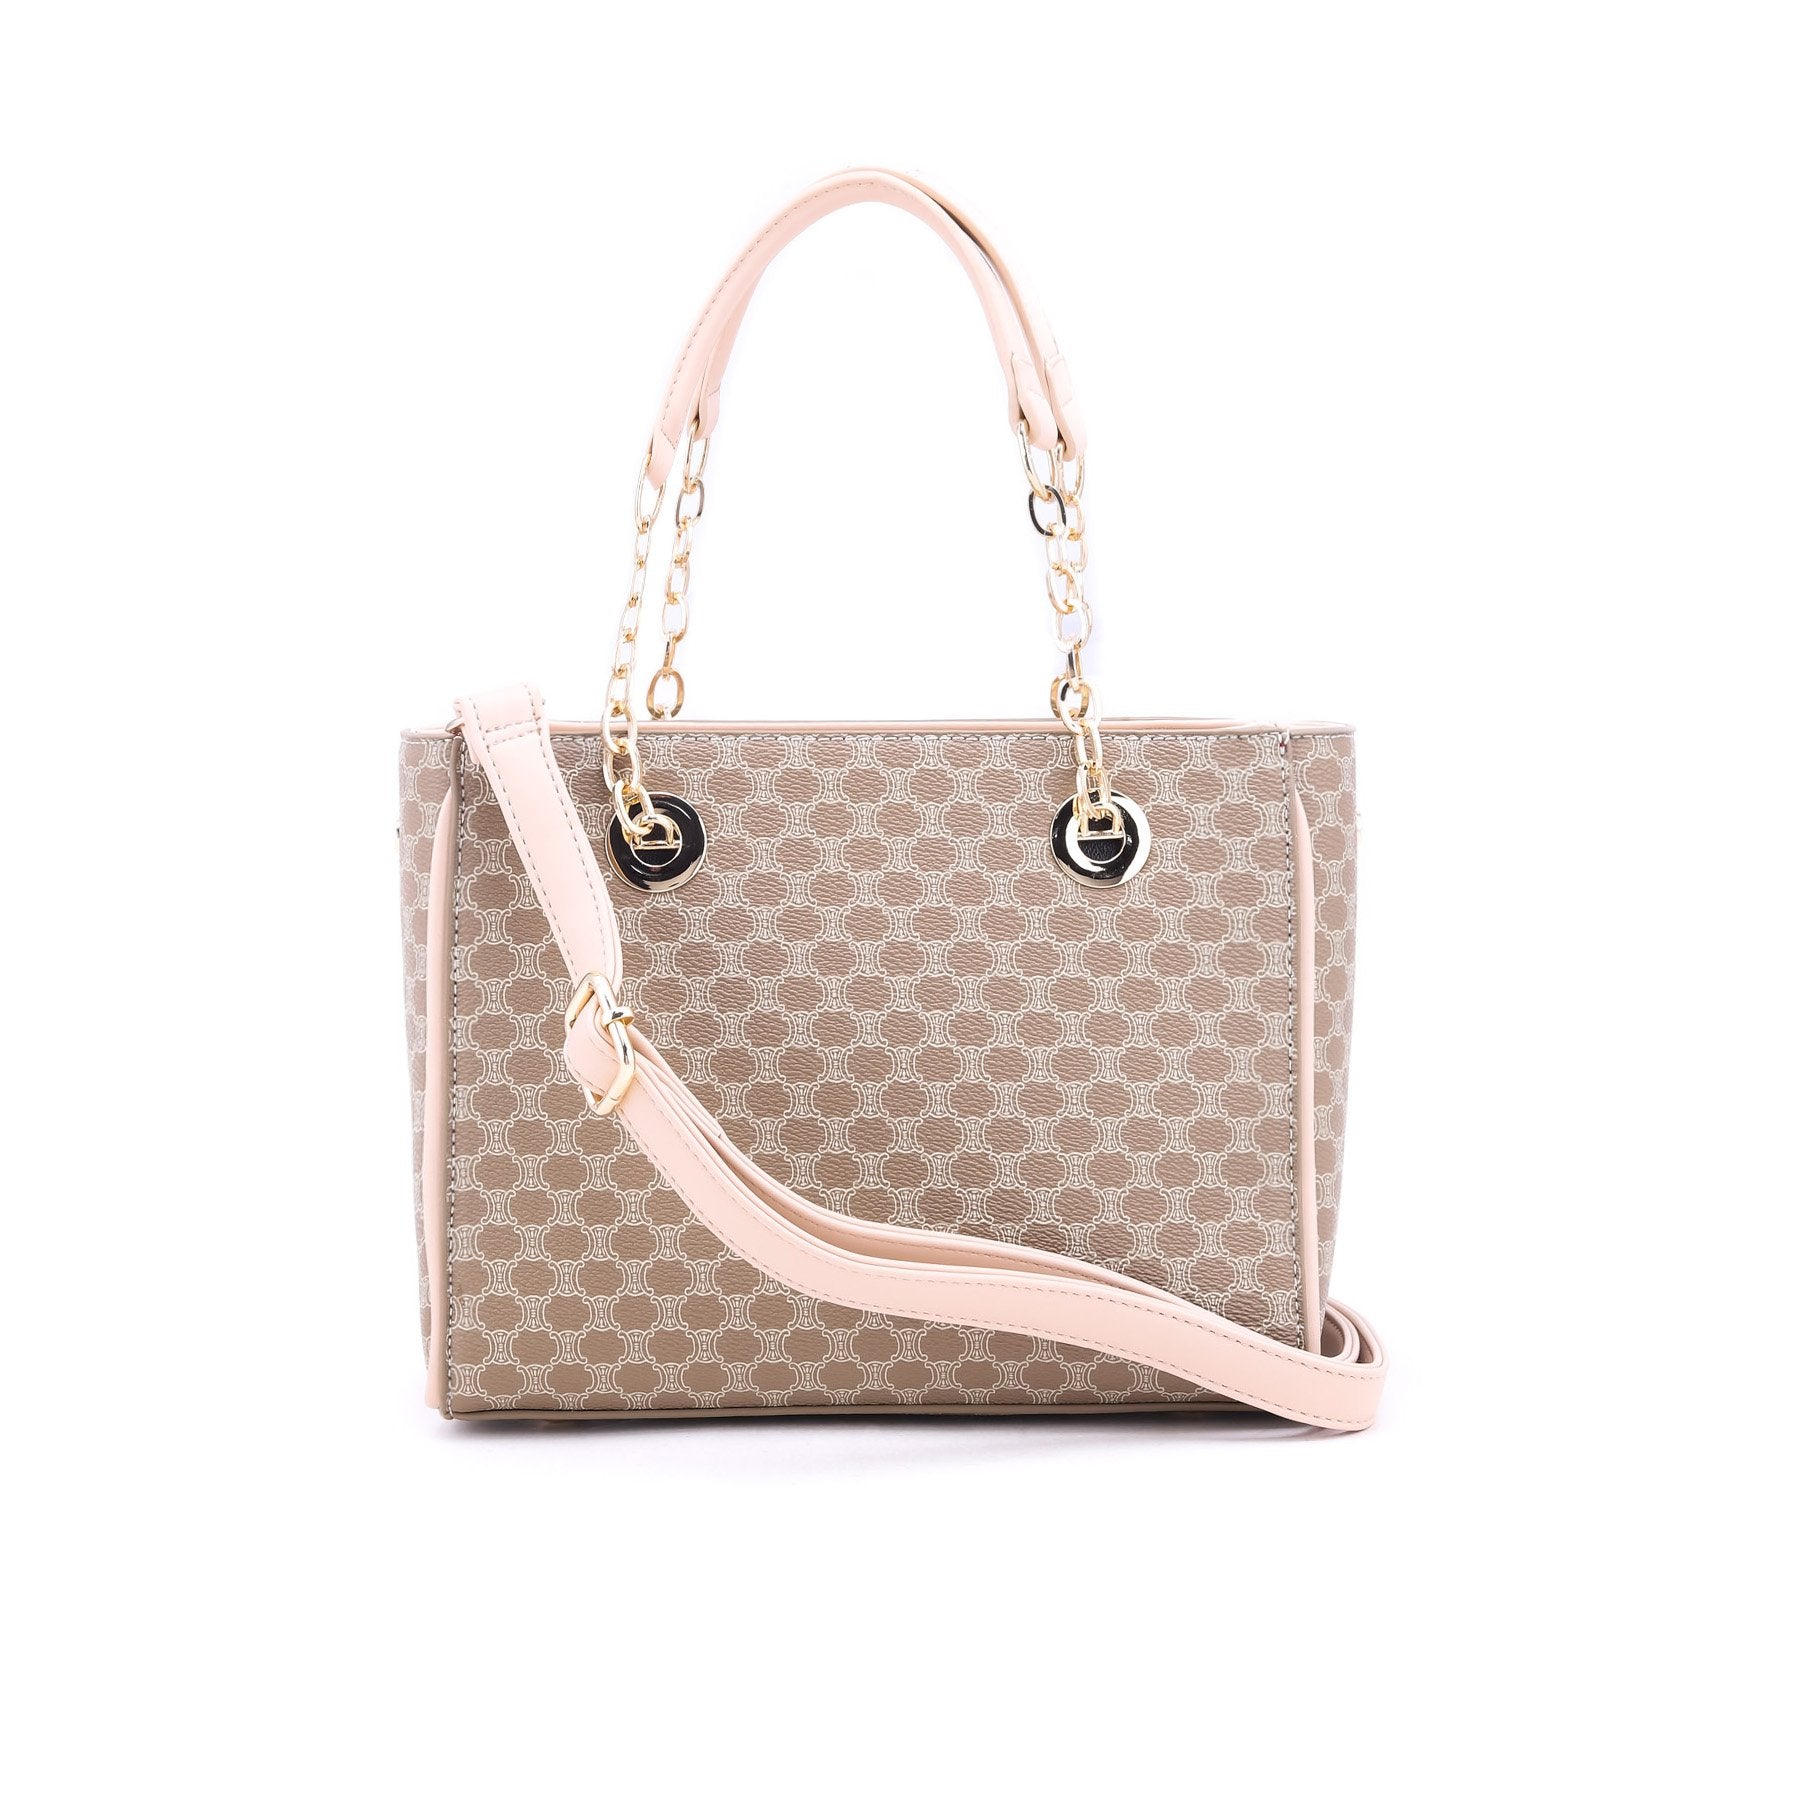 Fawn Color Formal Hand Bag P35001